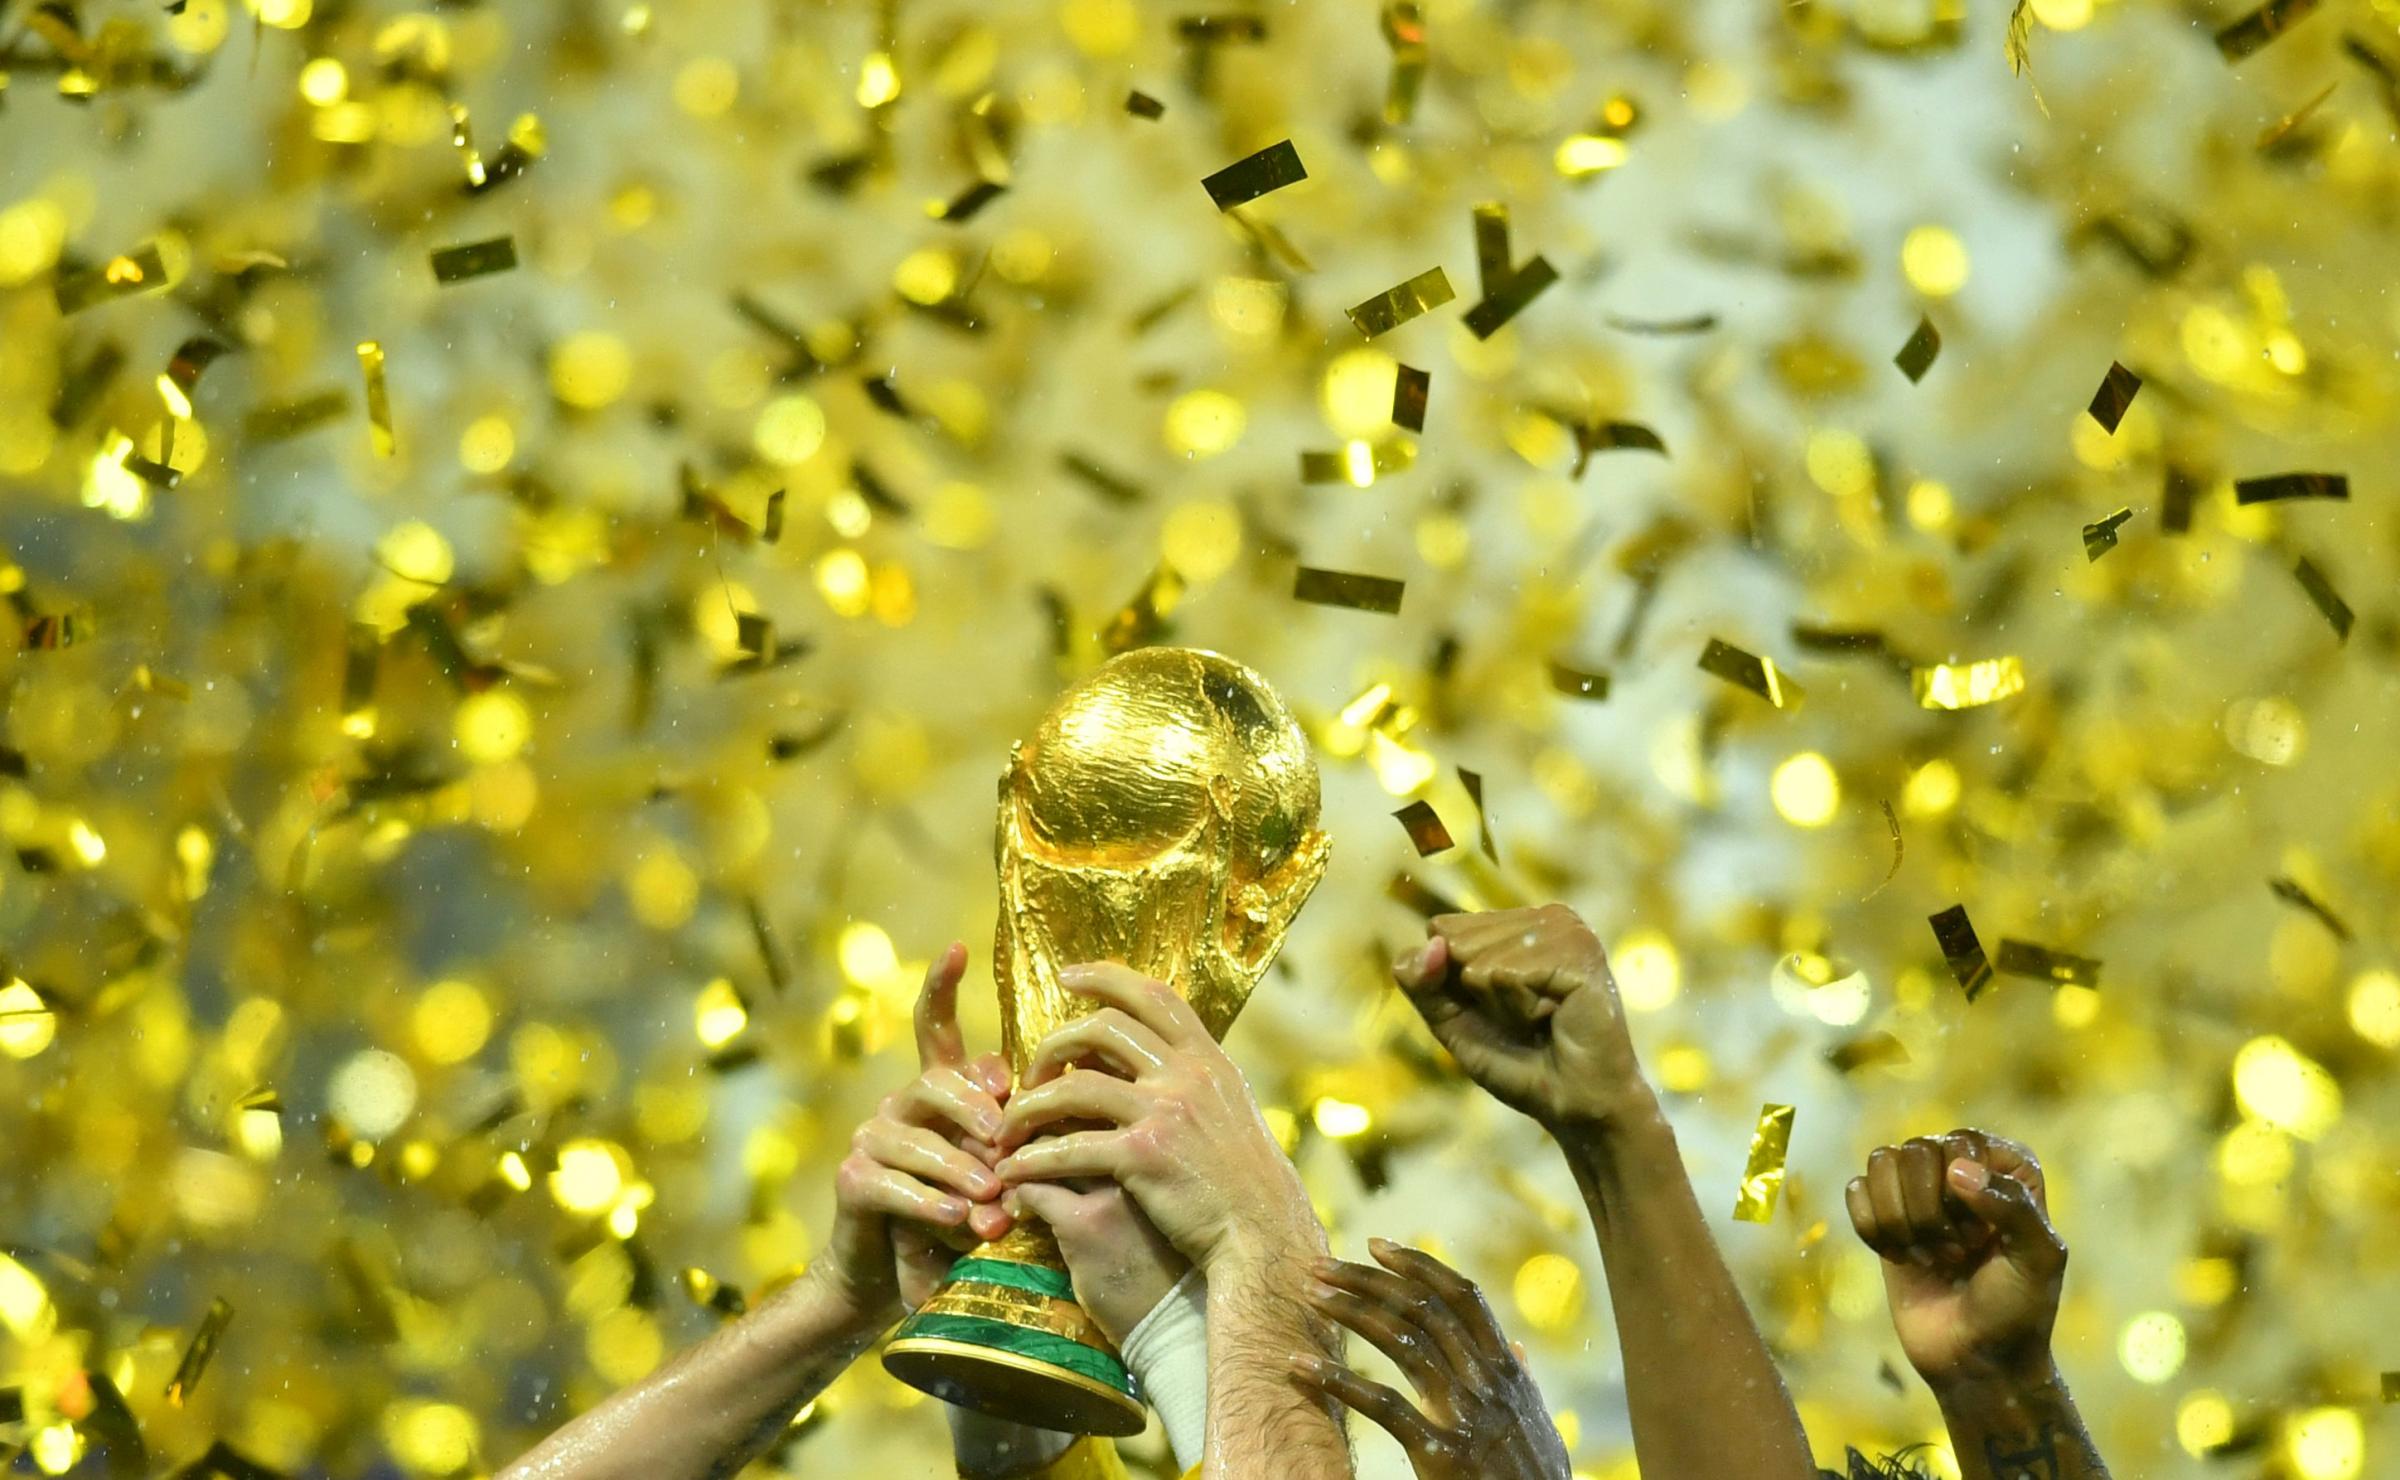 Premier League clubs against plans for World Cup every two years